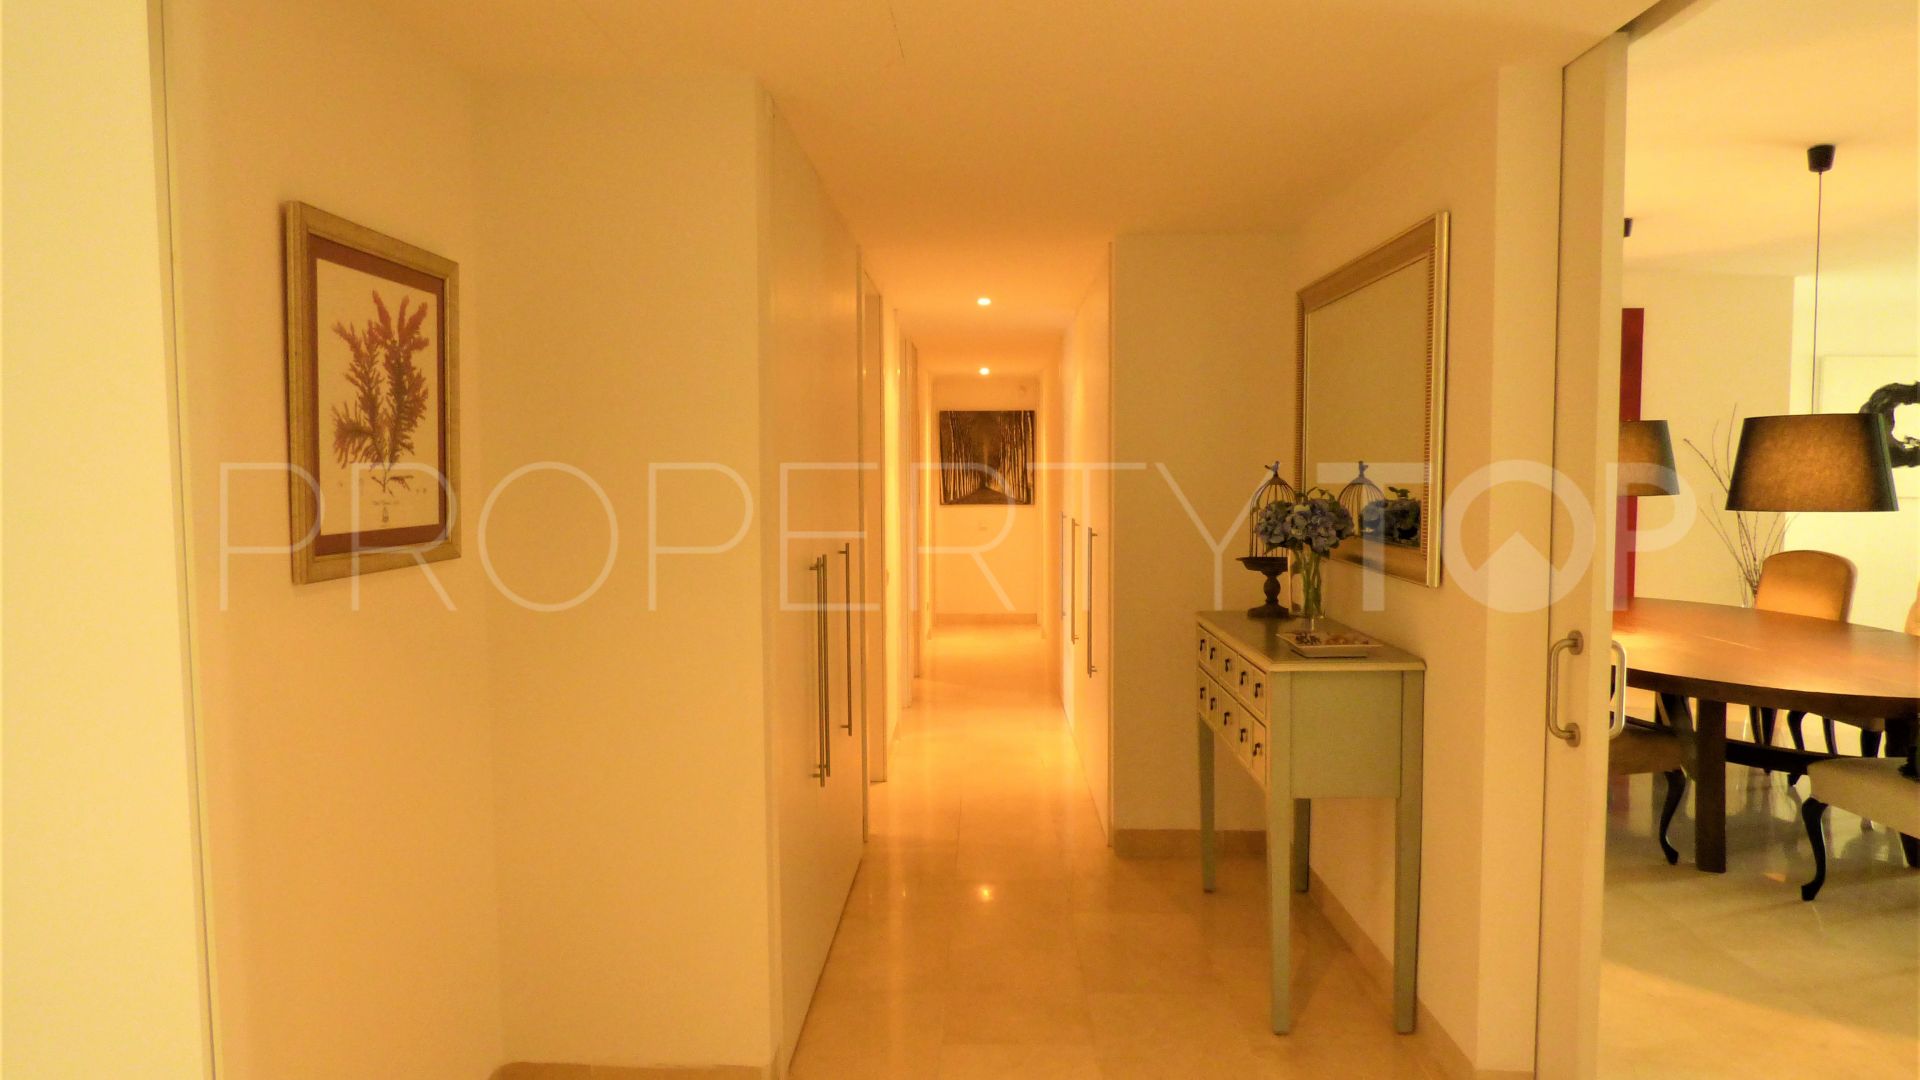 4 bedrooms Polo Gardens apartment for sale